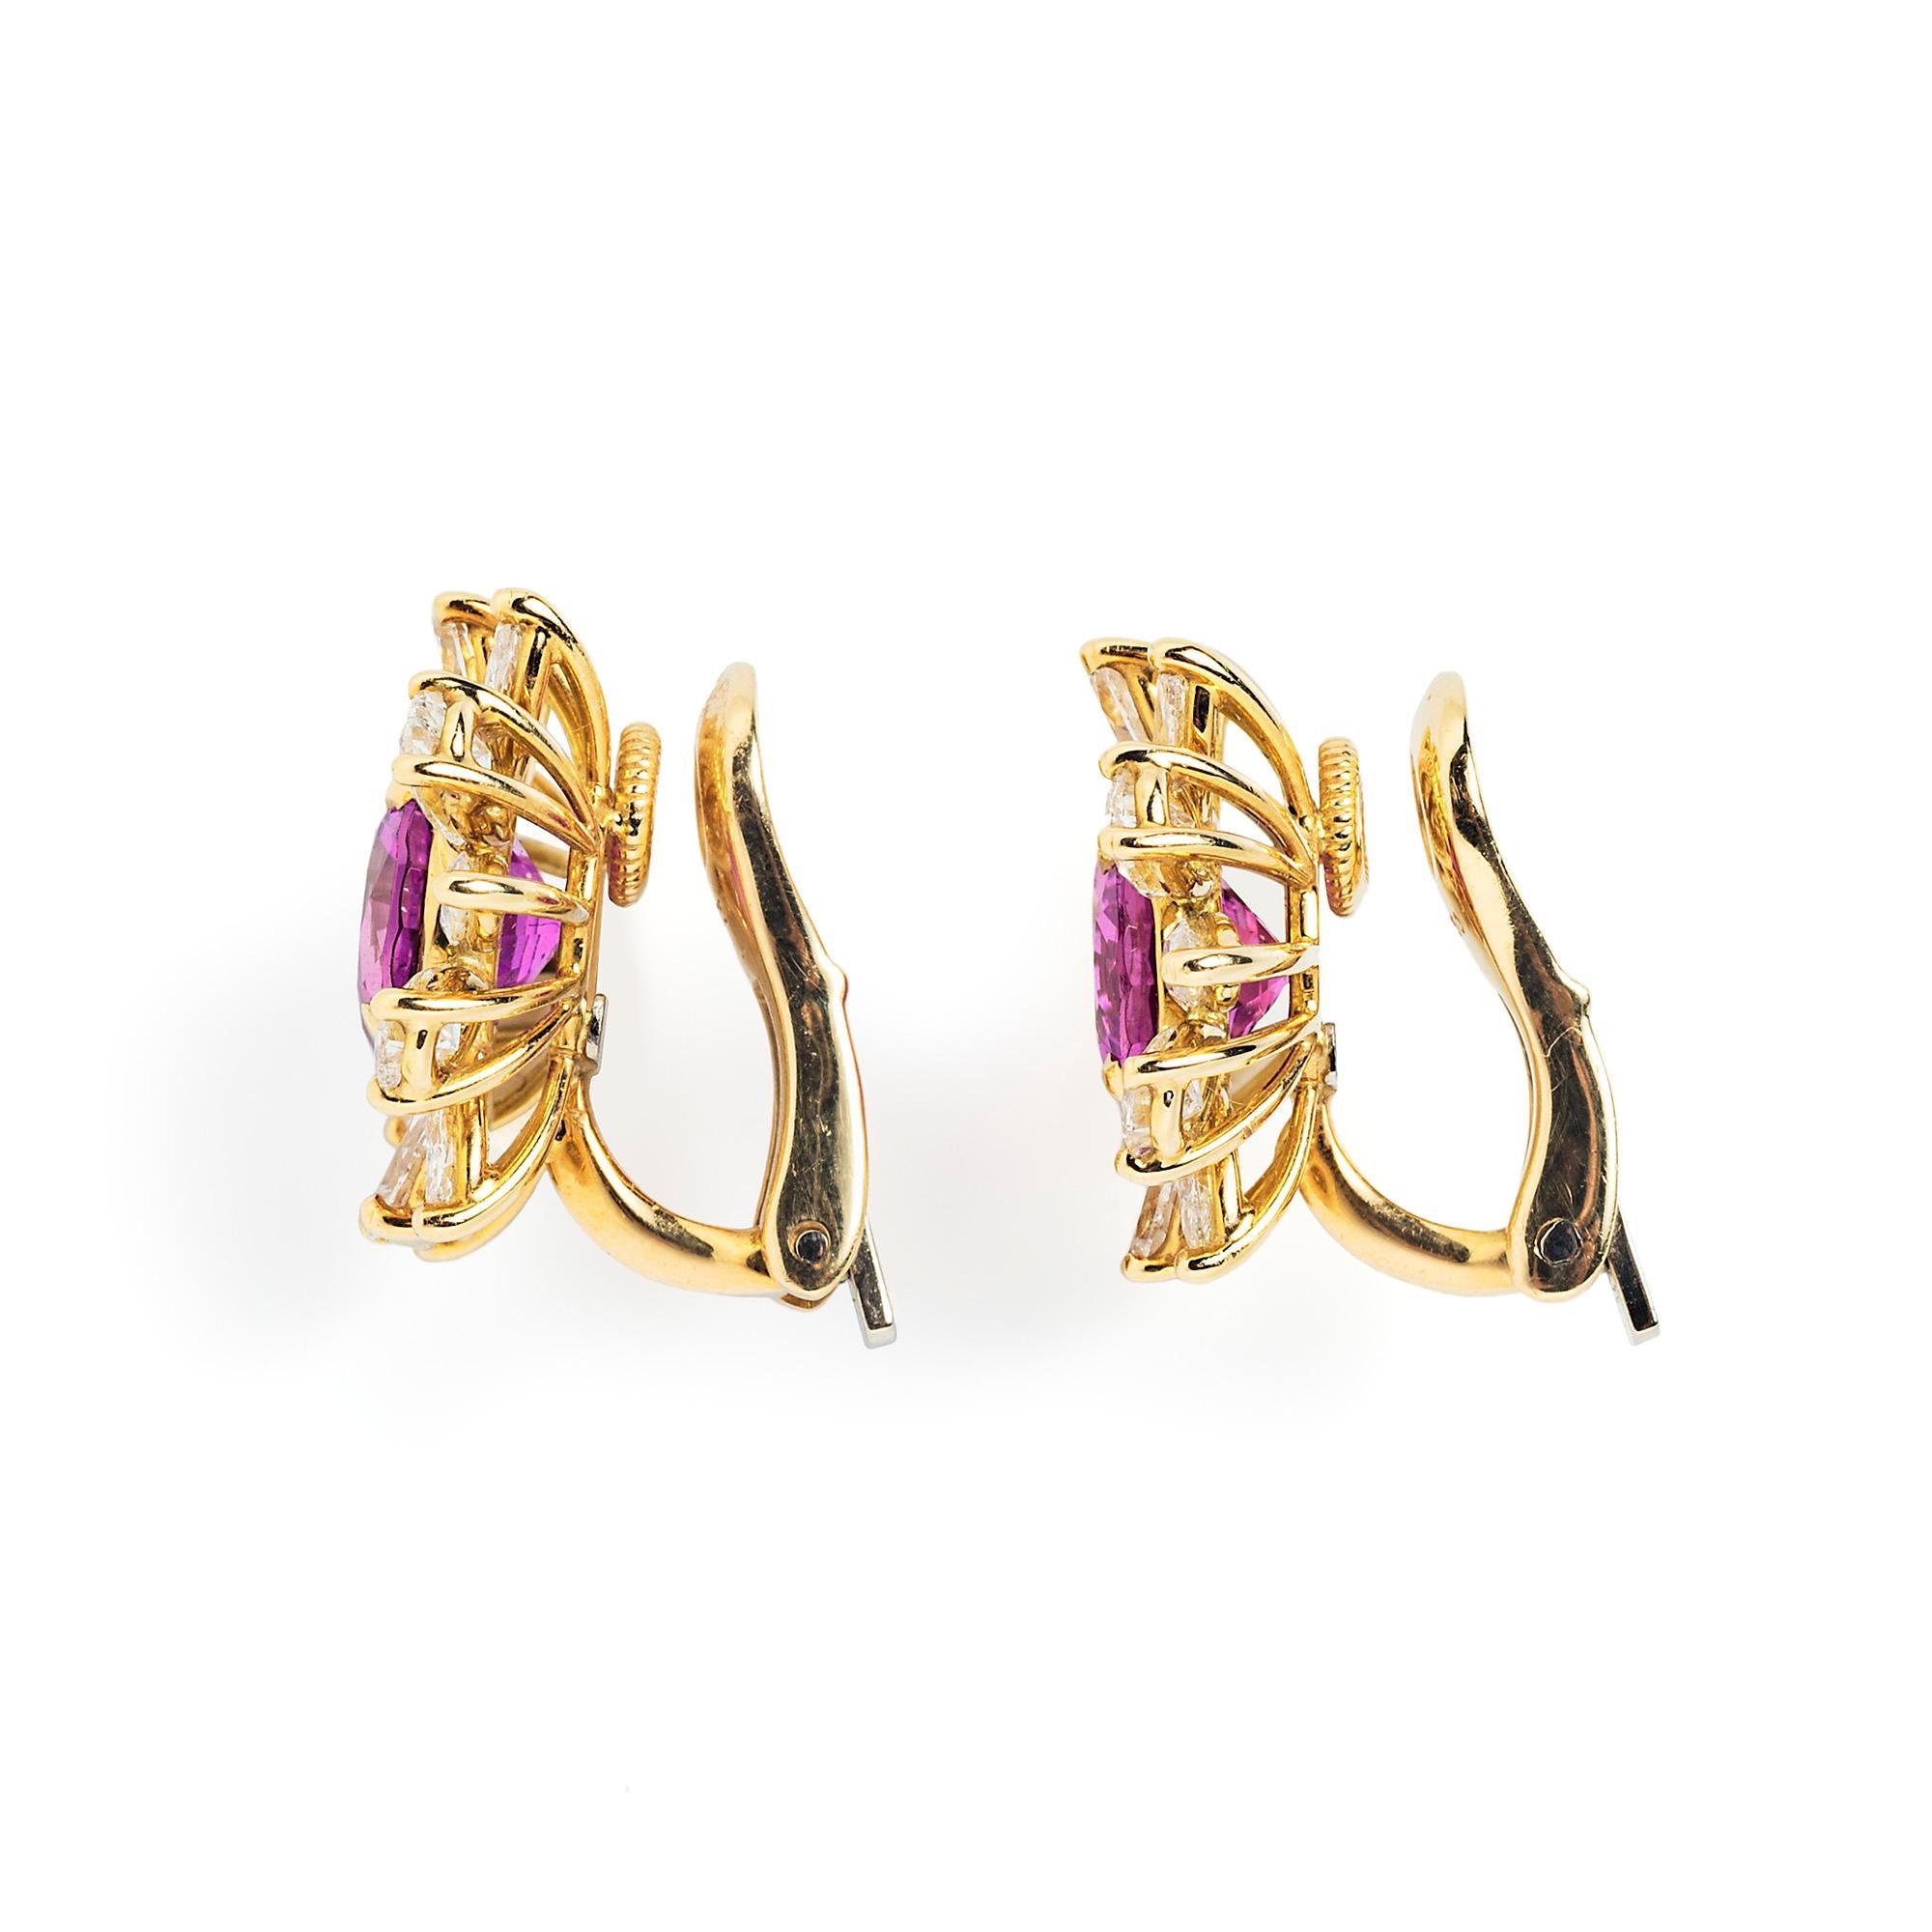 A lively array of pear and marquise-shaped diamonds surrounds intense pink sapphire centers in these decidedly modern floral form ear clips. Positioned at different angles, the diamonds create the illusion of movement.

Diameter approximately 0.625